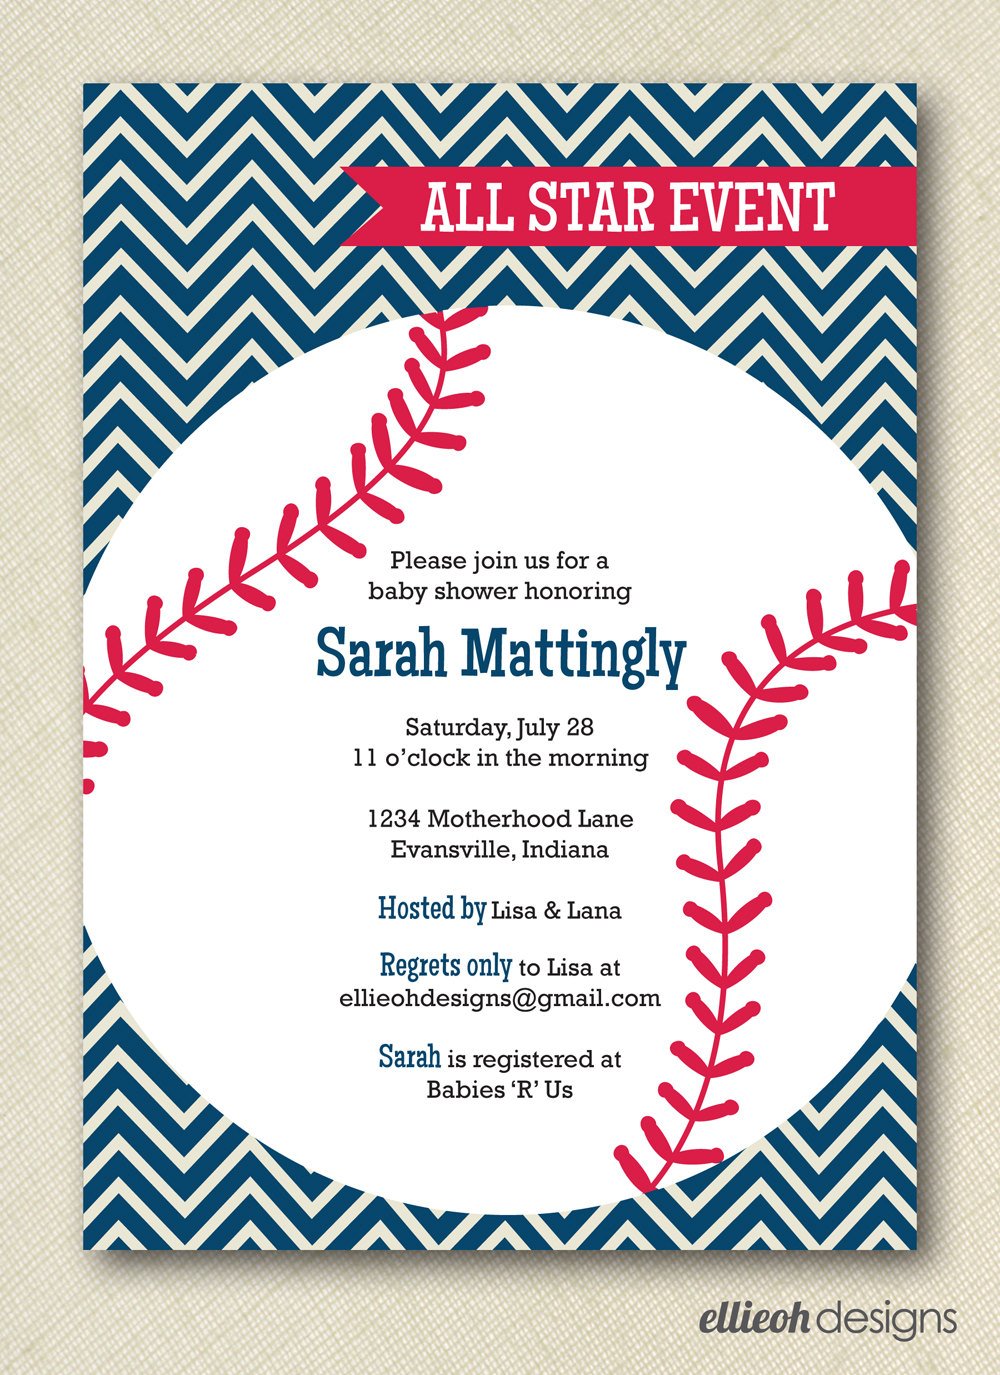 Get Baseball Birthday Party Invitations Images Free Invitation Template